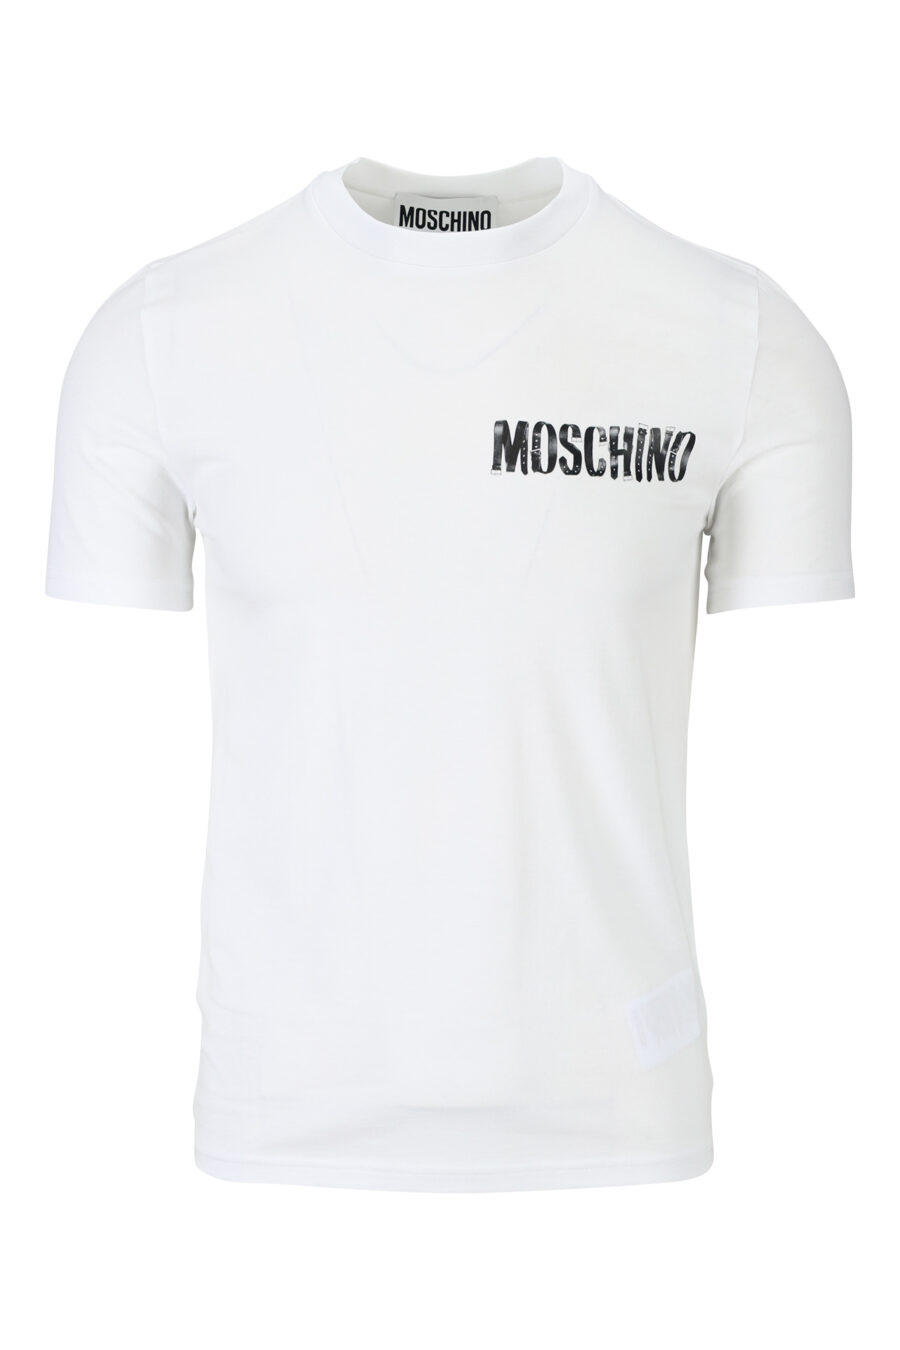 White T-shirt with black worn minilogue - 889316938791